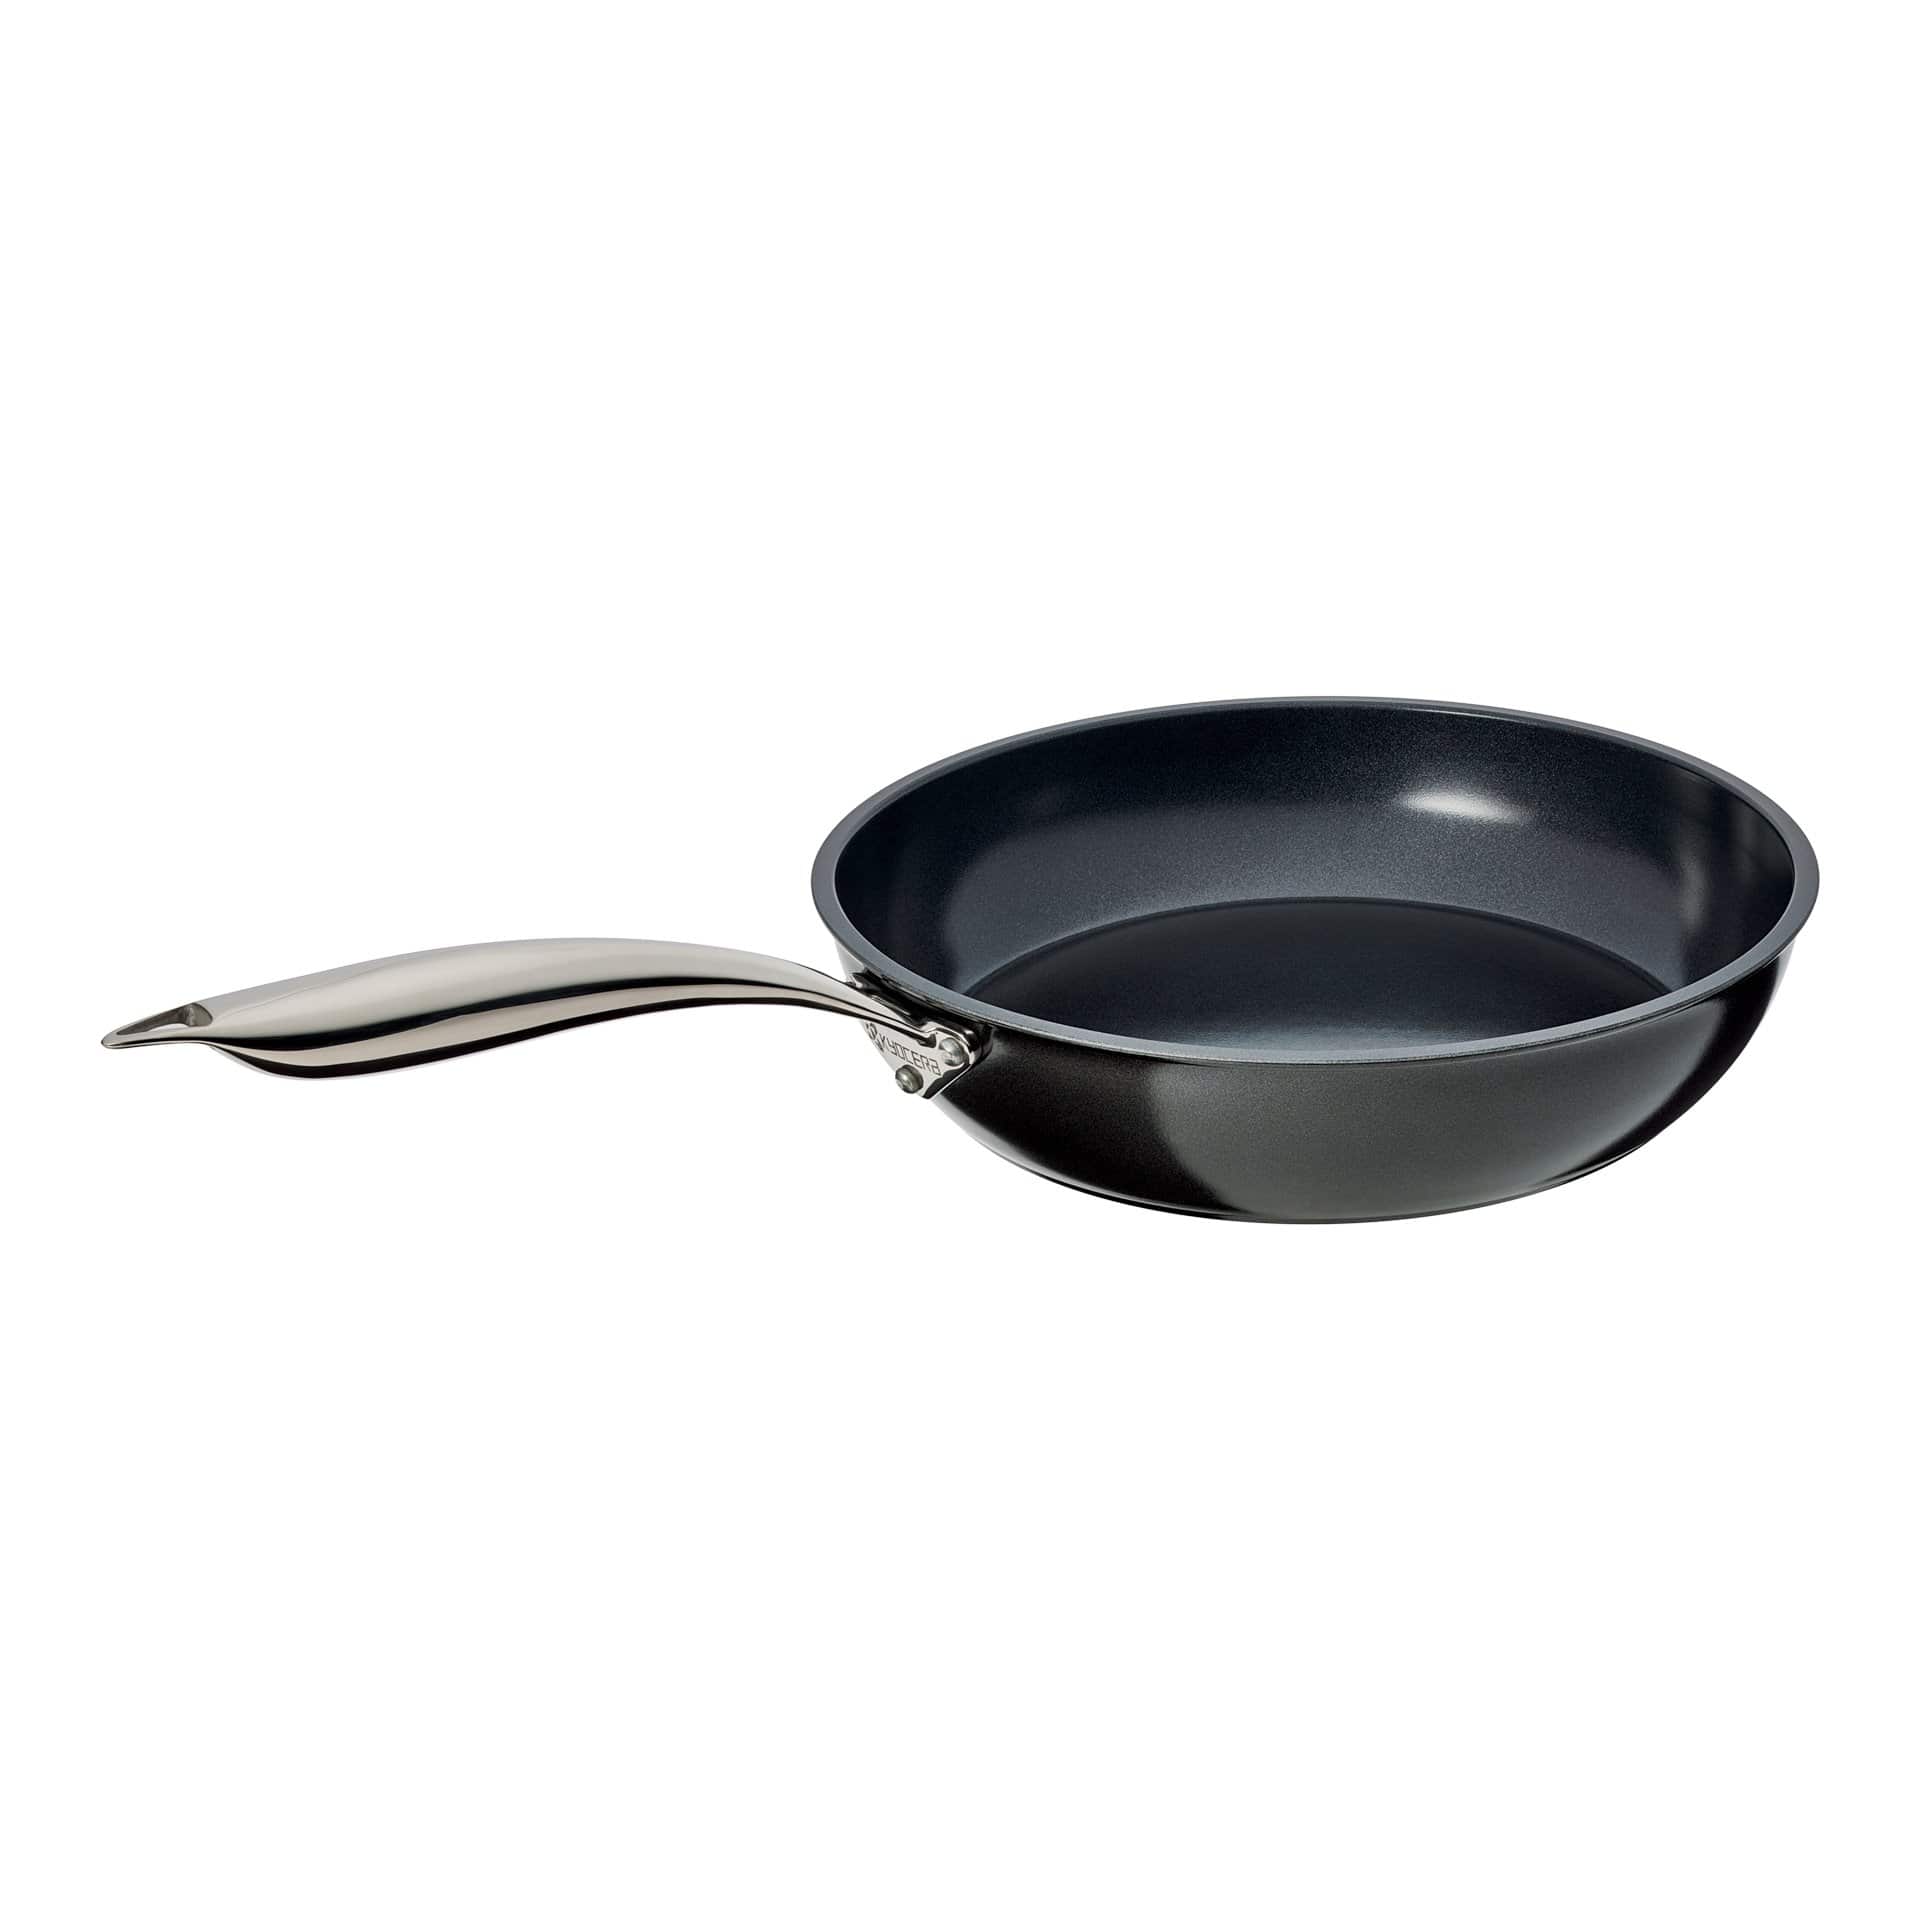 Zwilling Clad Cfx 10-inch Stainless Steel Ceramic Nonstick Fry Pan